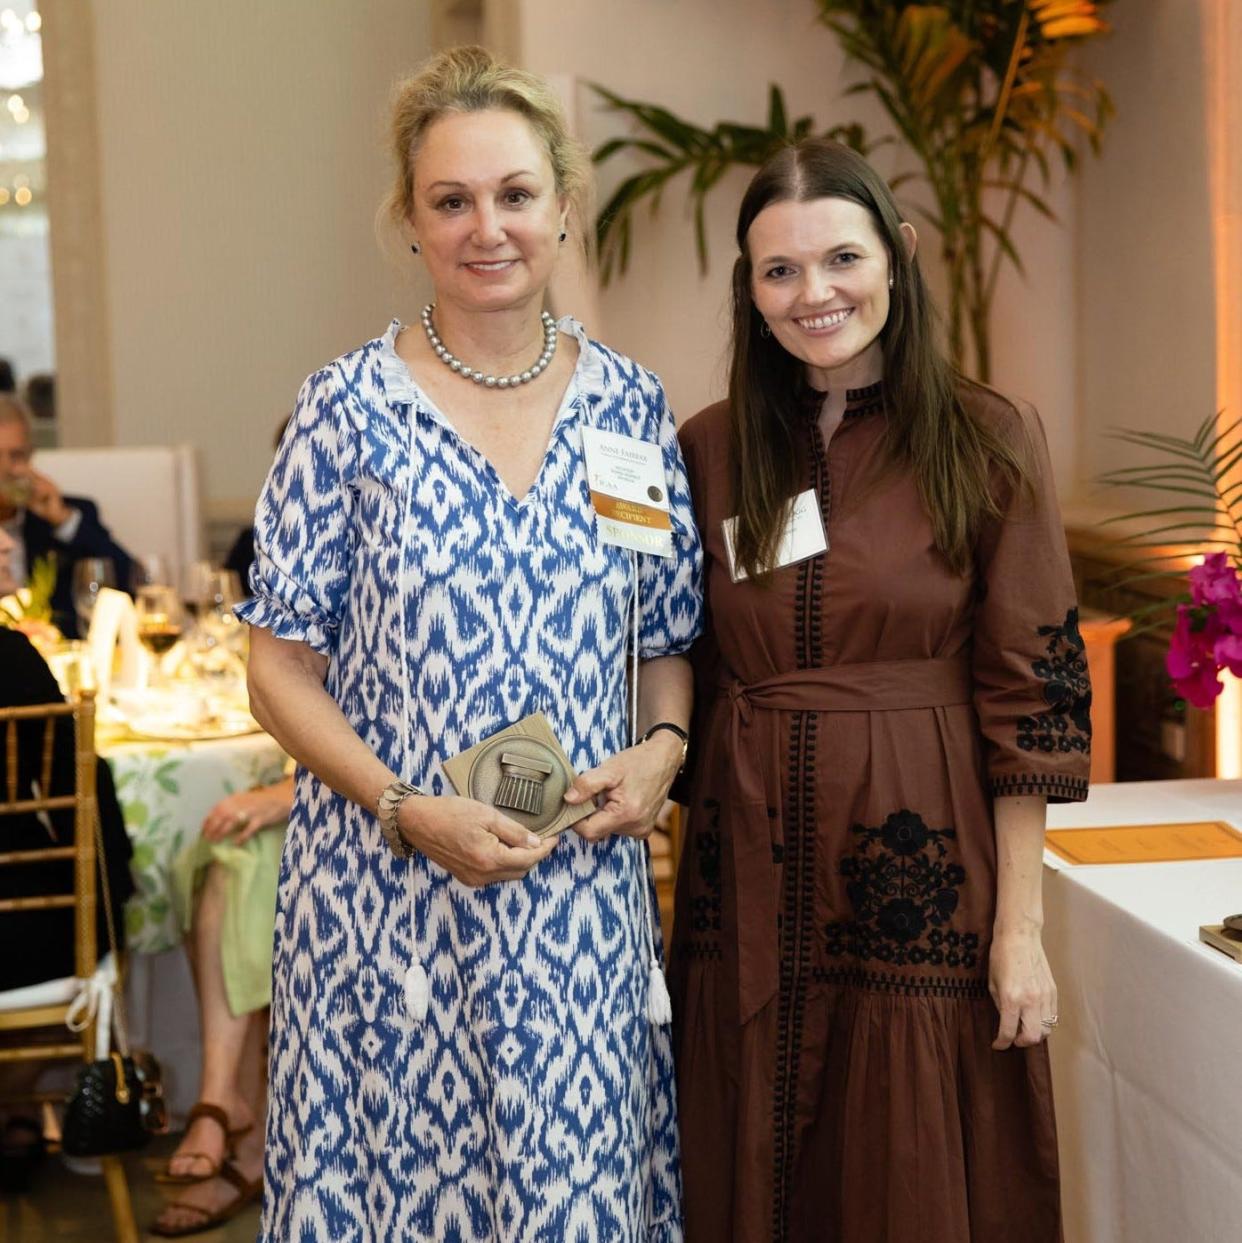 Anne Fairfax, left, of Fairfax & Sammons Architects, with Kristin Kellogg, Florida chapter president of the Institute of Classical Architecture & Art, celebrates her firm's four awards at the 11th annual juried competition sponsored by the ICAA.
(Photo: [CAPEHART])